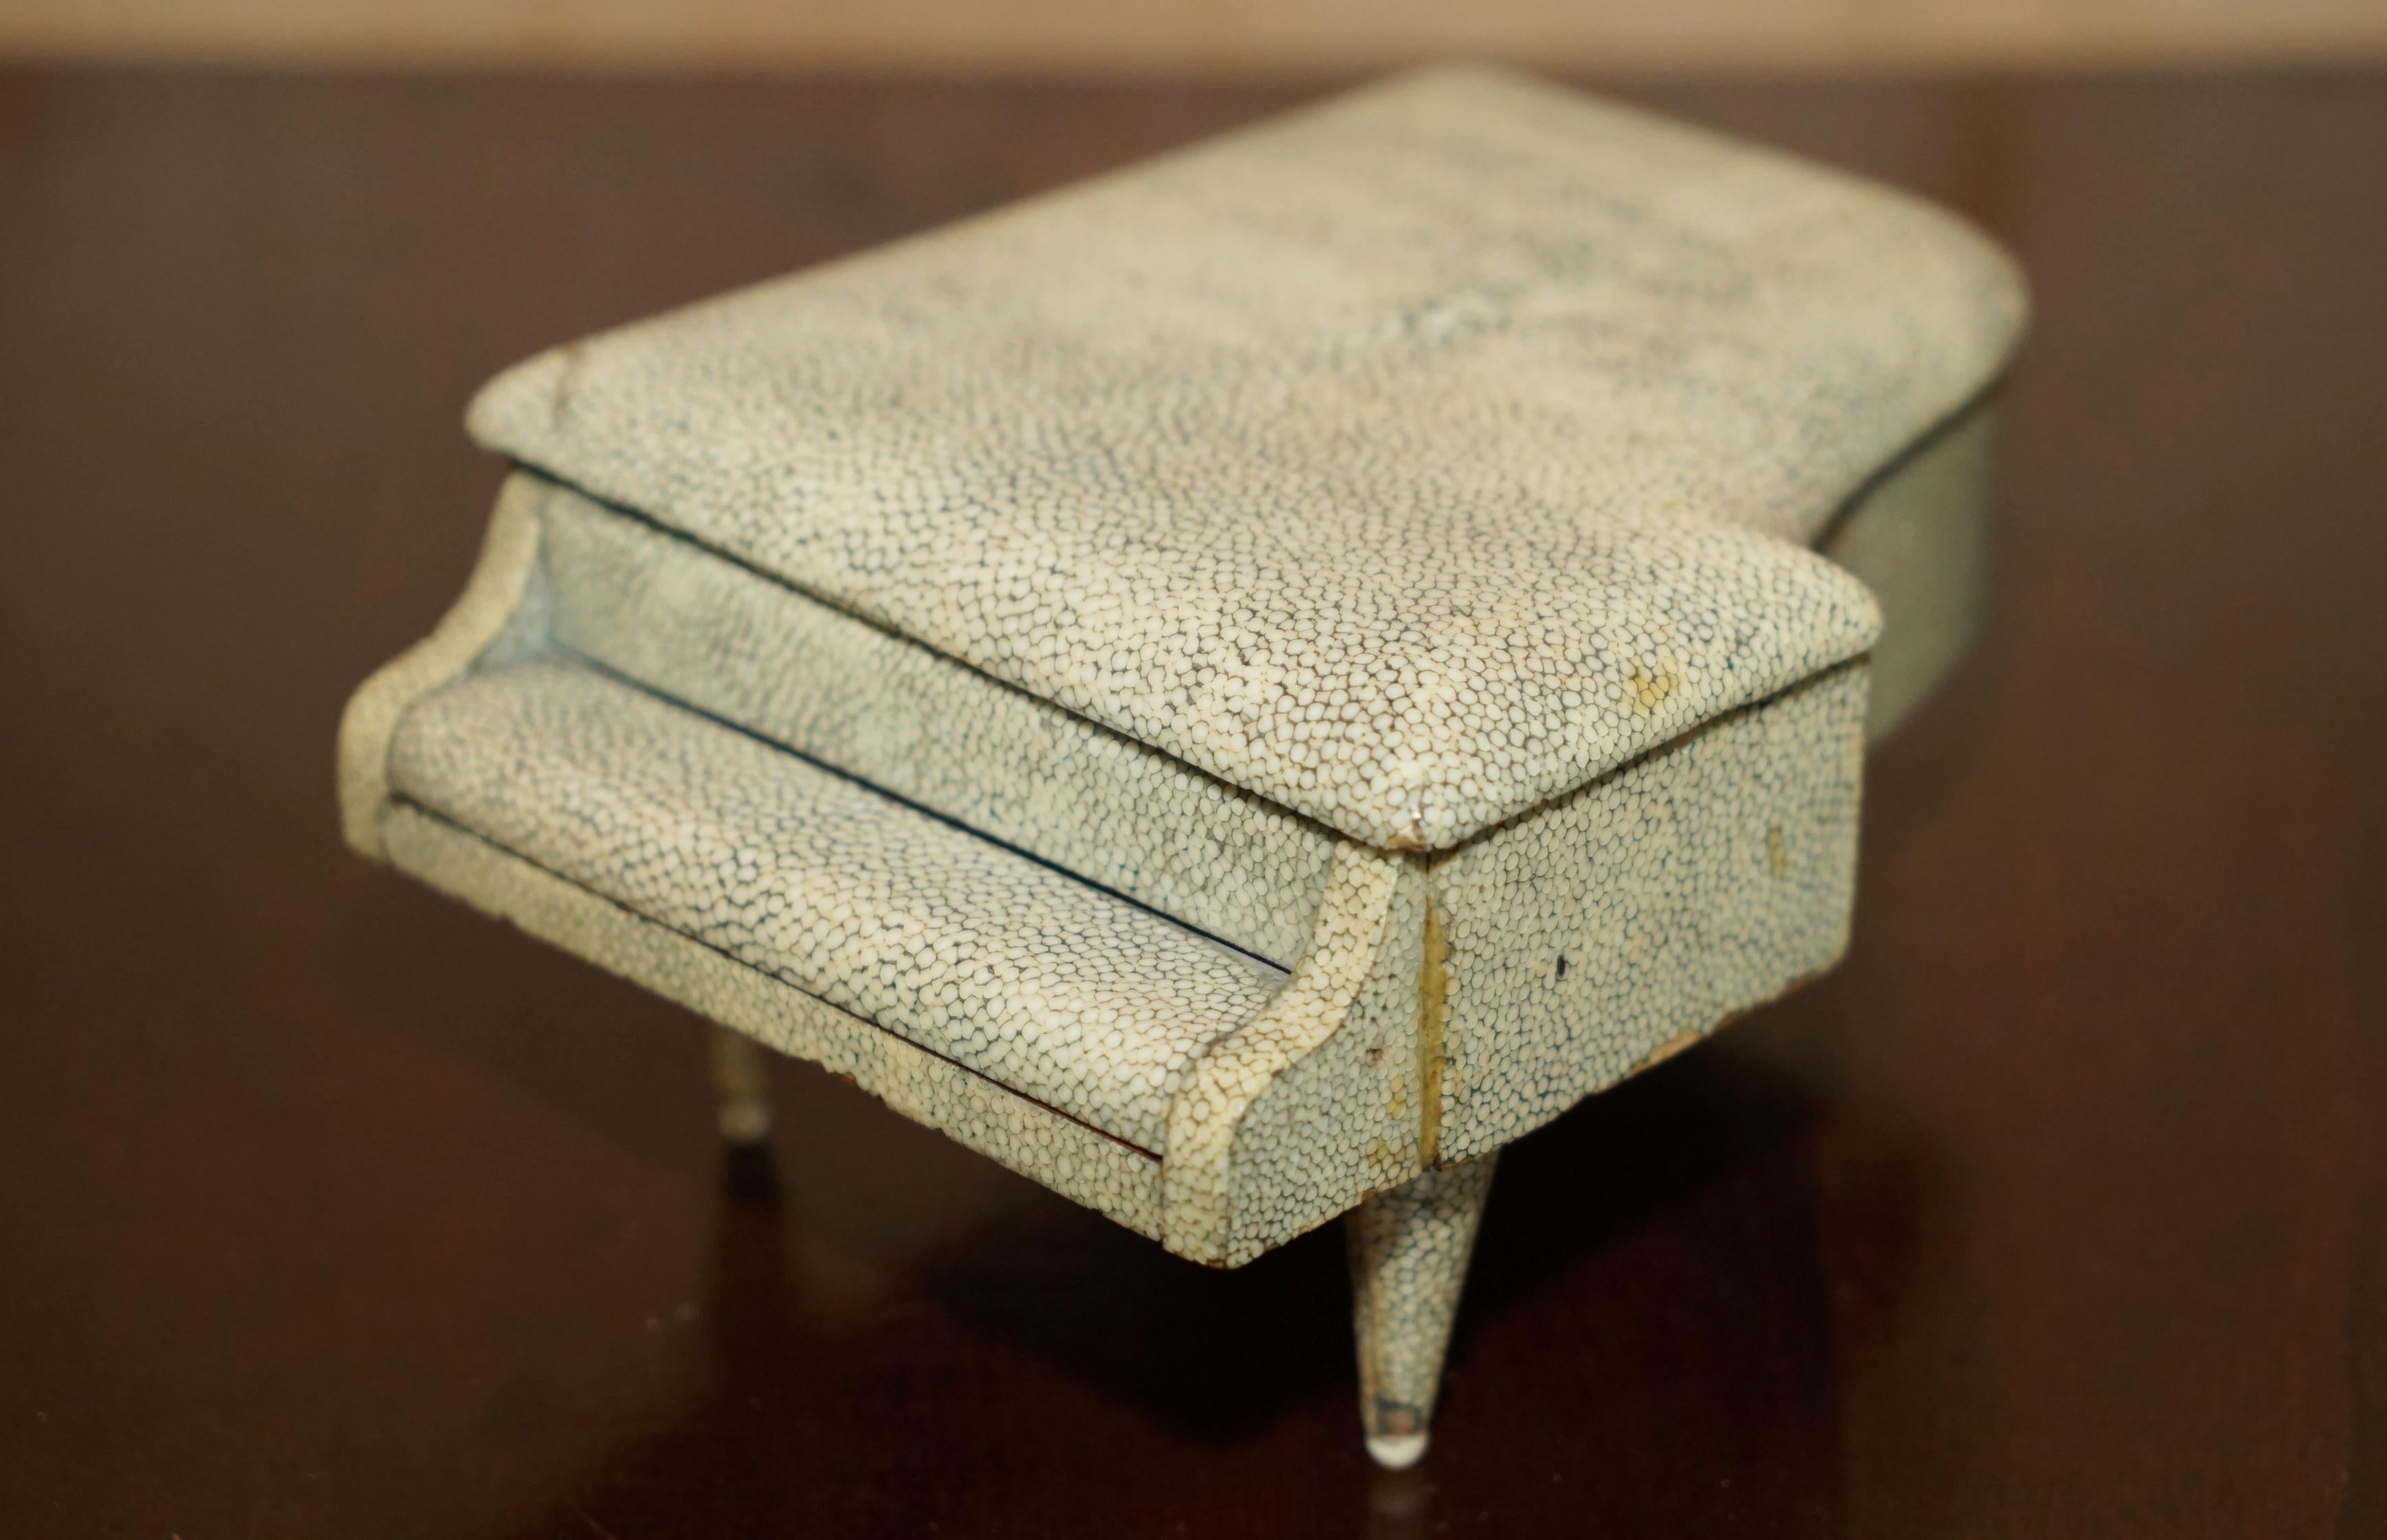 Royal House Antiques is delighted to offer for sale this super rare, highly collectable, Antique Victorian circa 1880, Shagreen & Burr Walnut Piano Musical Jewellery box

What a thing! Have you ever seen a better example of this type of box!